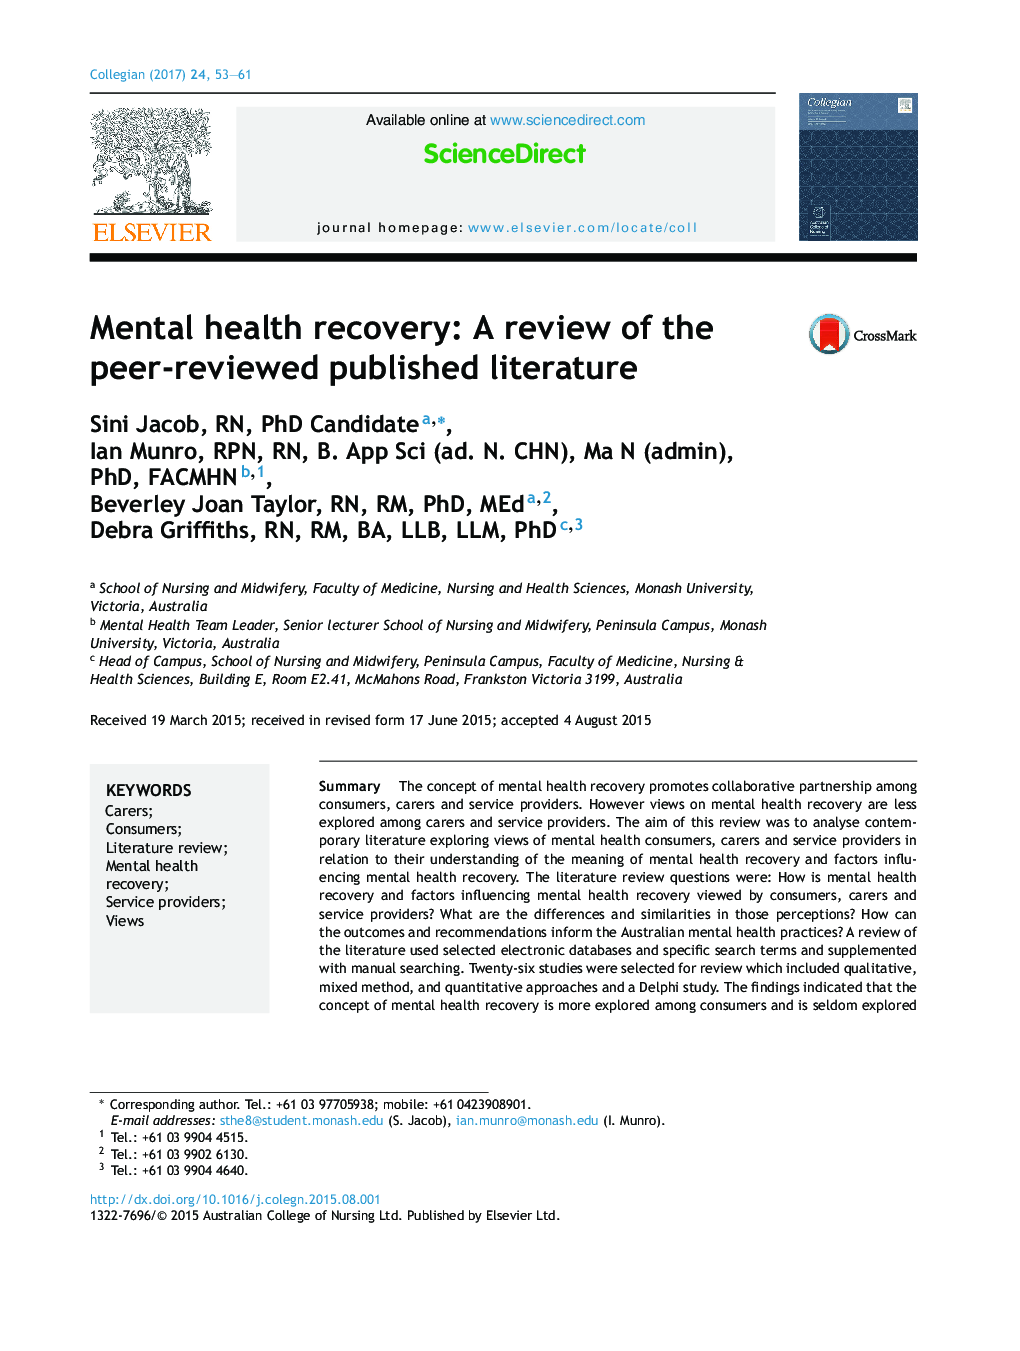 Mental health recovery: A review of the peer-reviewed published literature